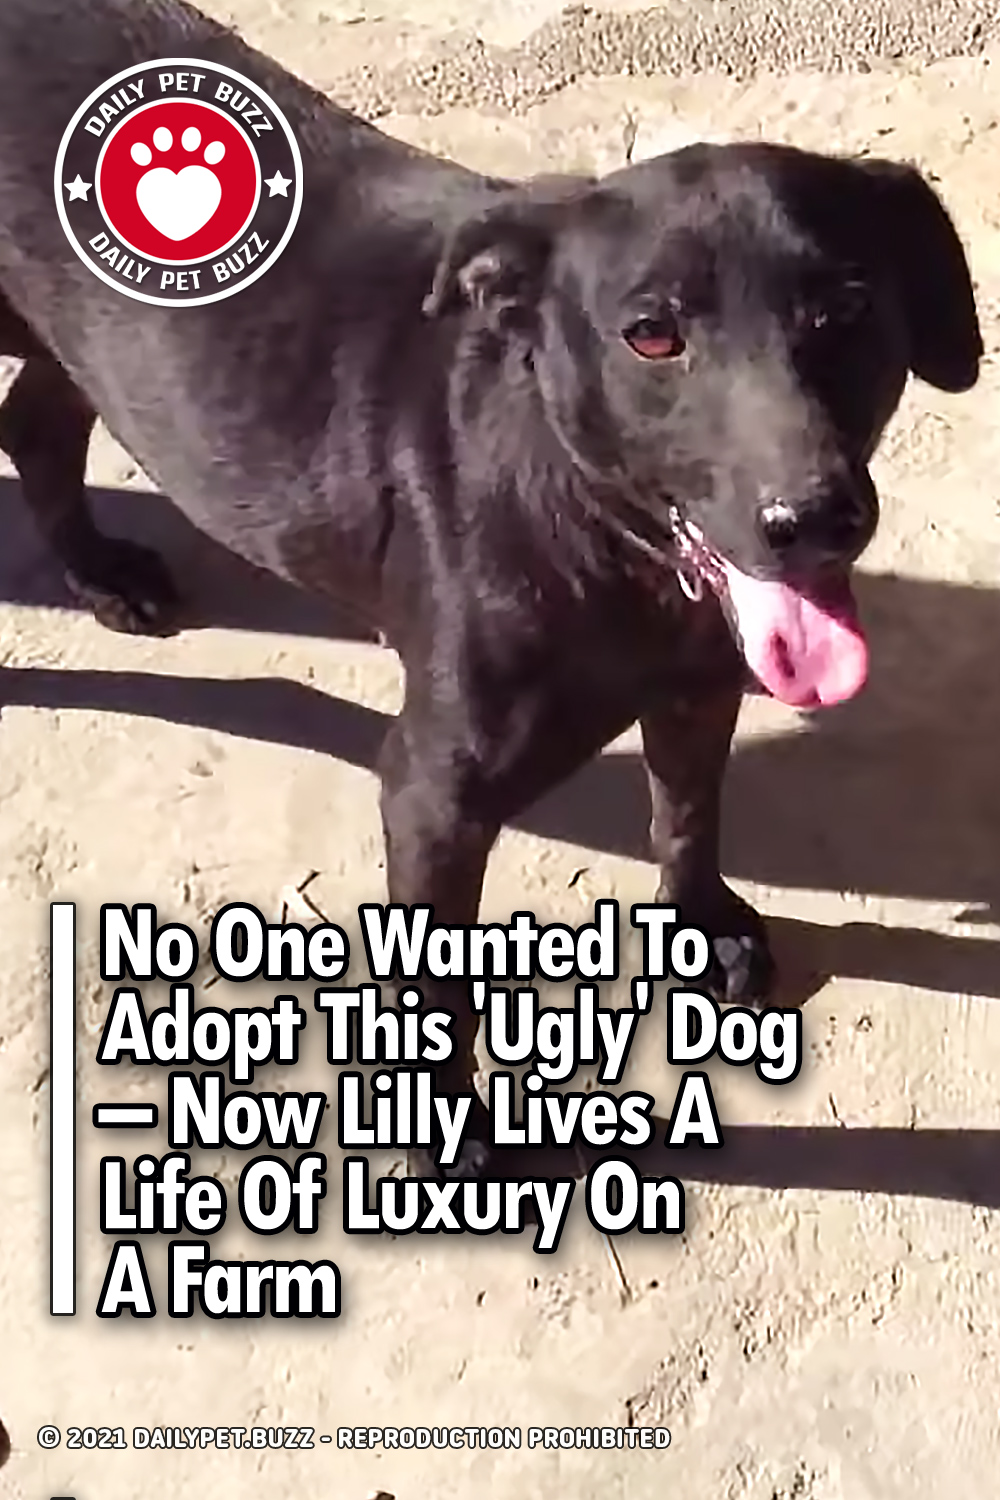 No One Wanted To Adopt This \'Ugly\' Dog – Now Lilly Lives A Life Of Luxury On A Farm